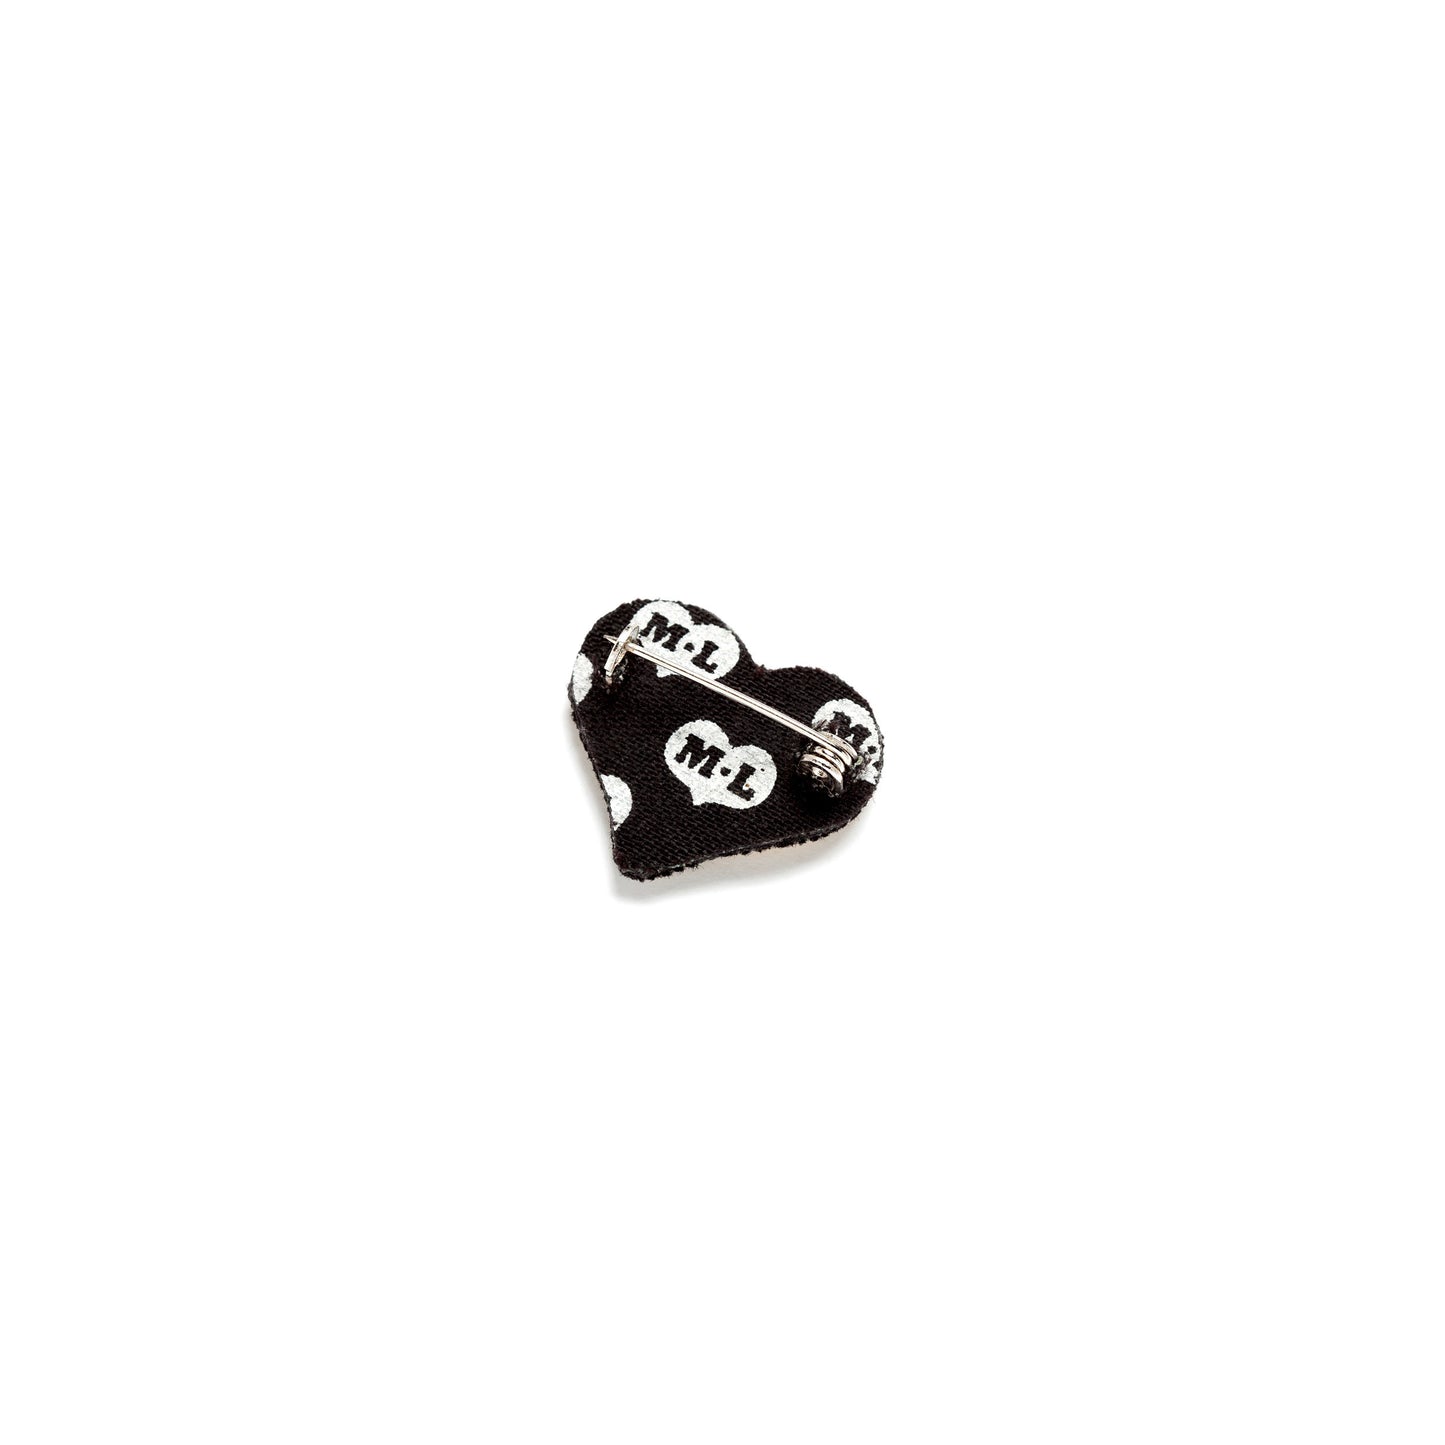 Macon & Les Quoy GOLD HEART - small pin